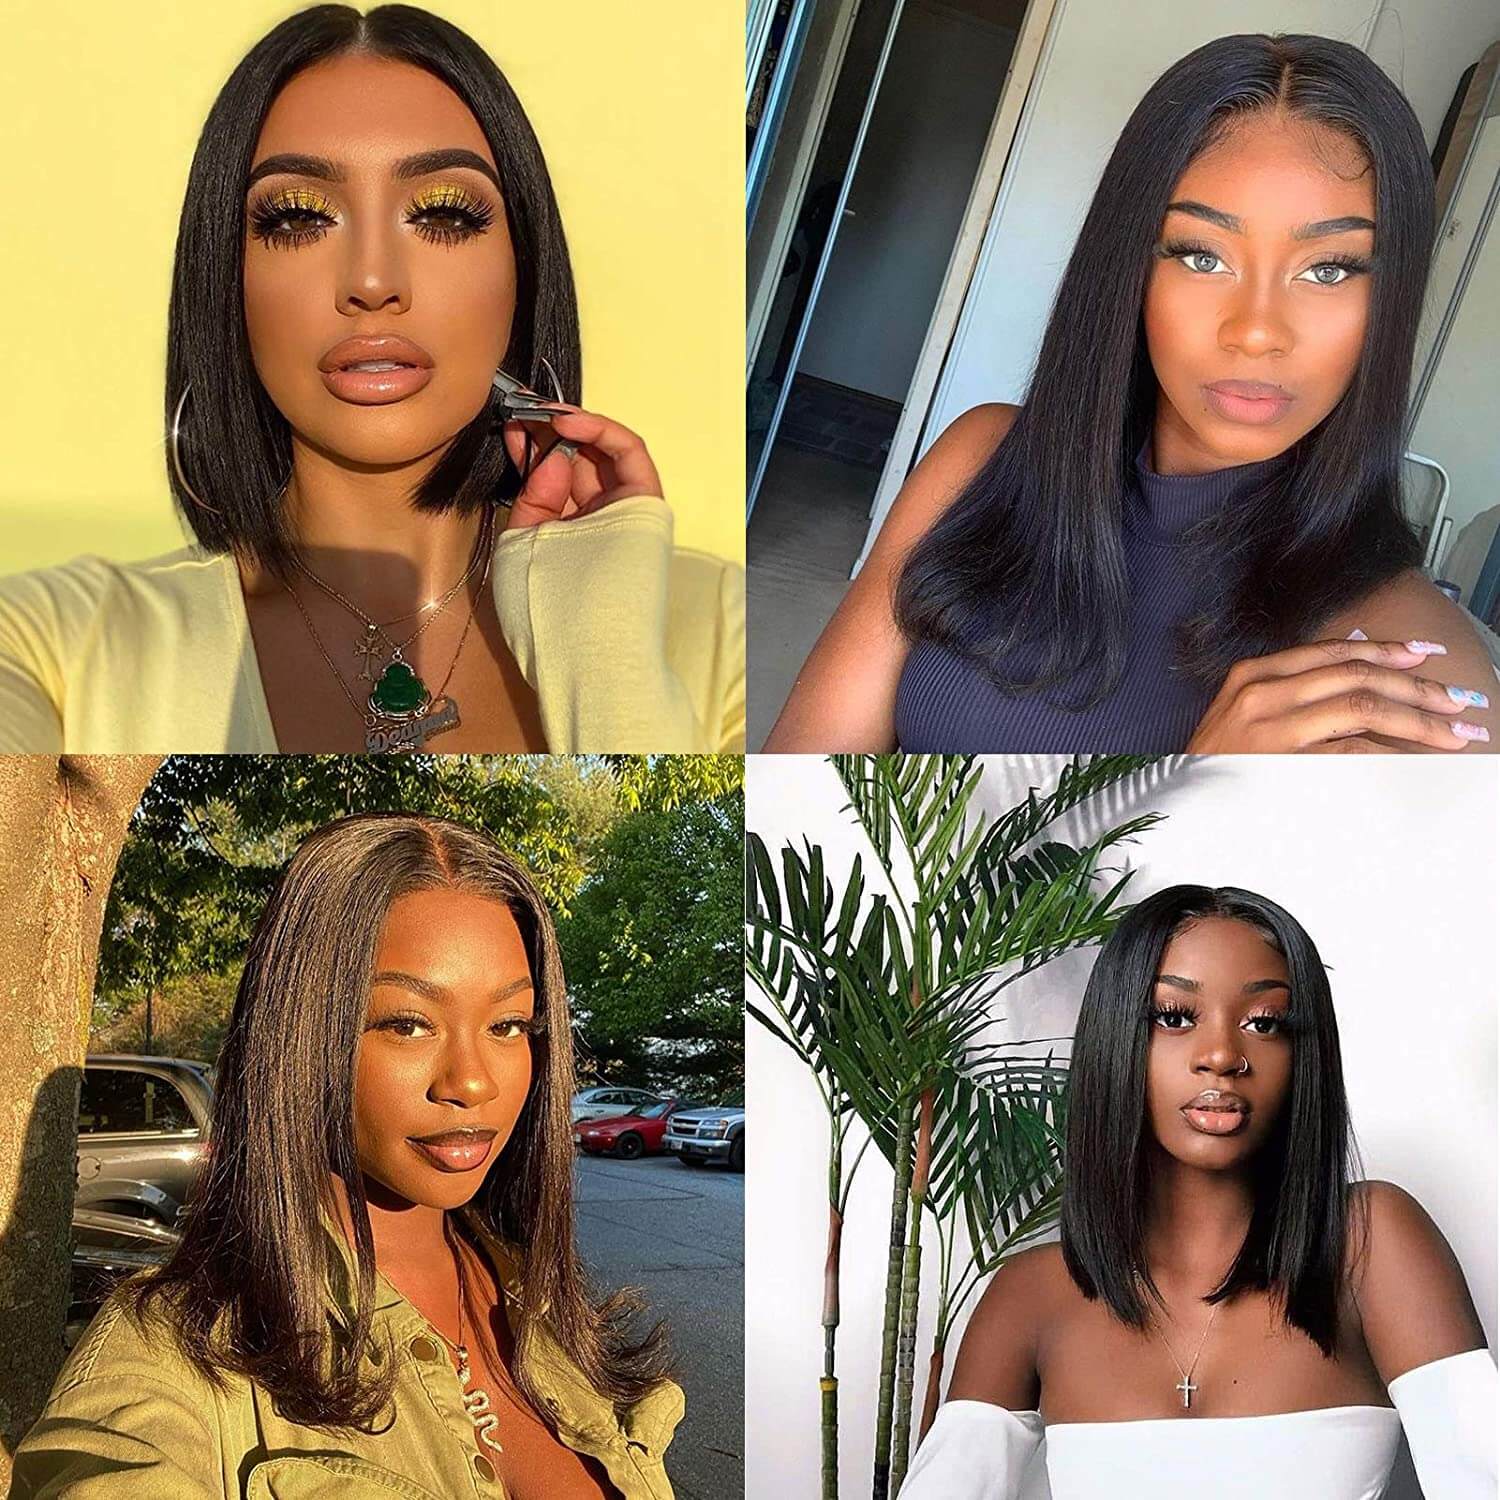 Xtrend Short Bob Lace front Human Hair Wigs Pre Plucked Straight 150% Density 4x4 Deep Part Frontal Virgin Remy Brazilian Hair